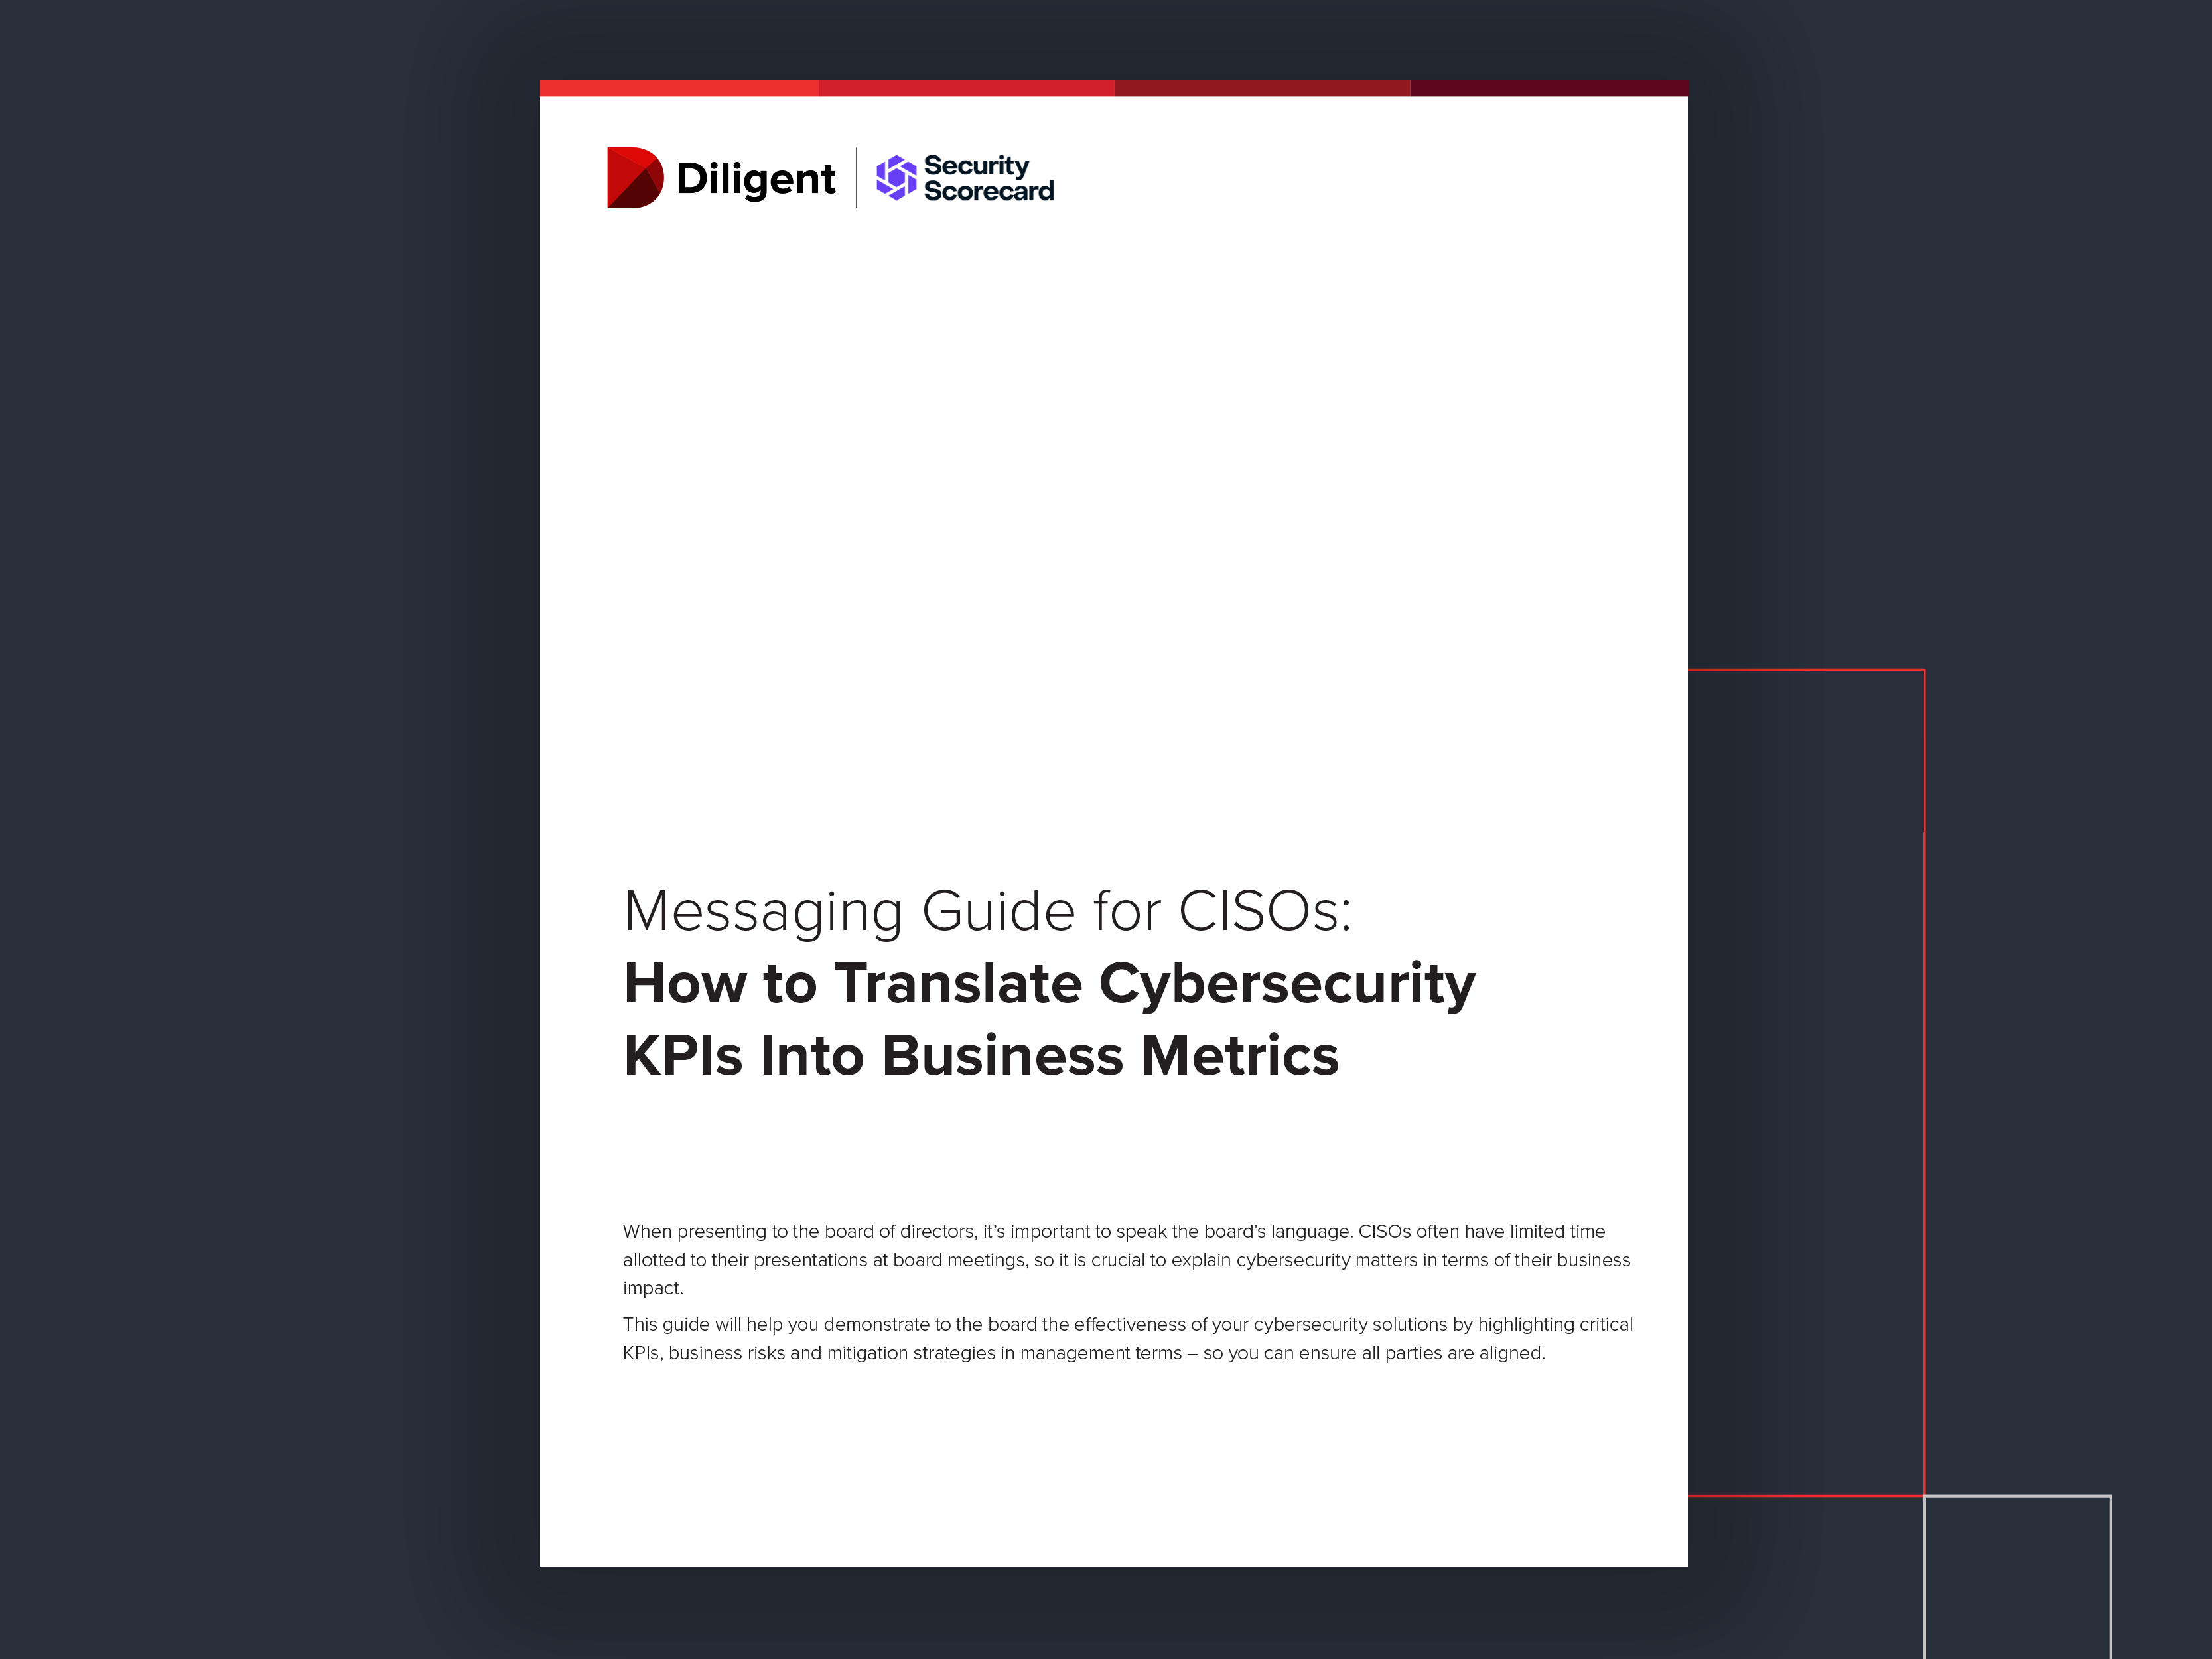 Messaging guide for CISOs